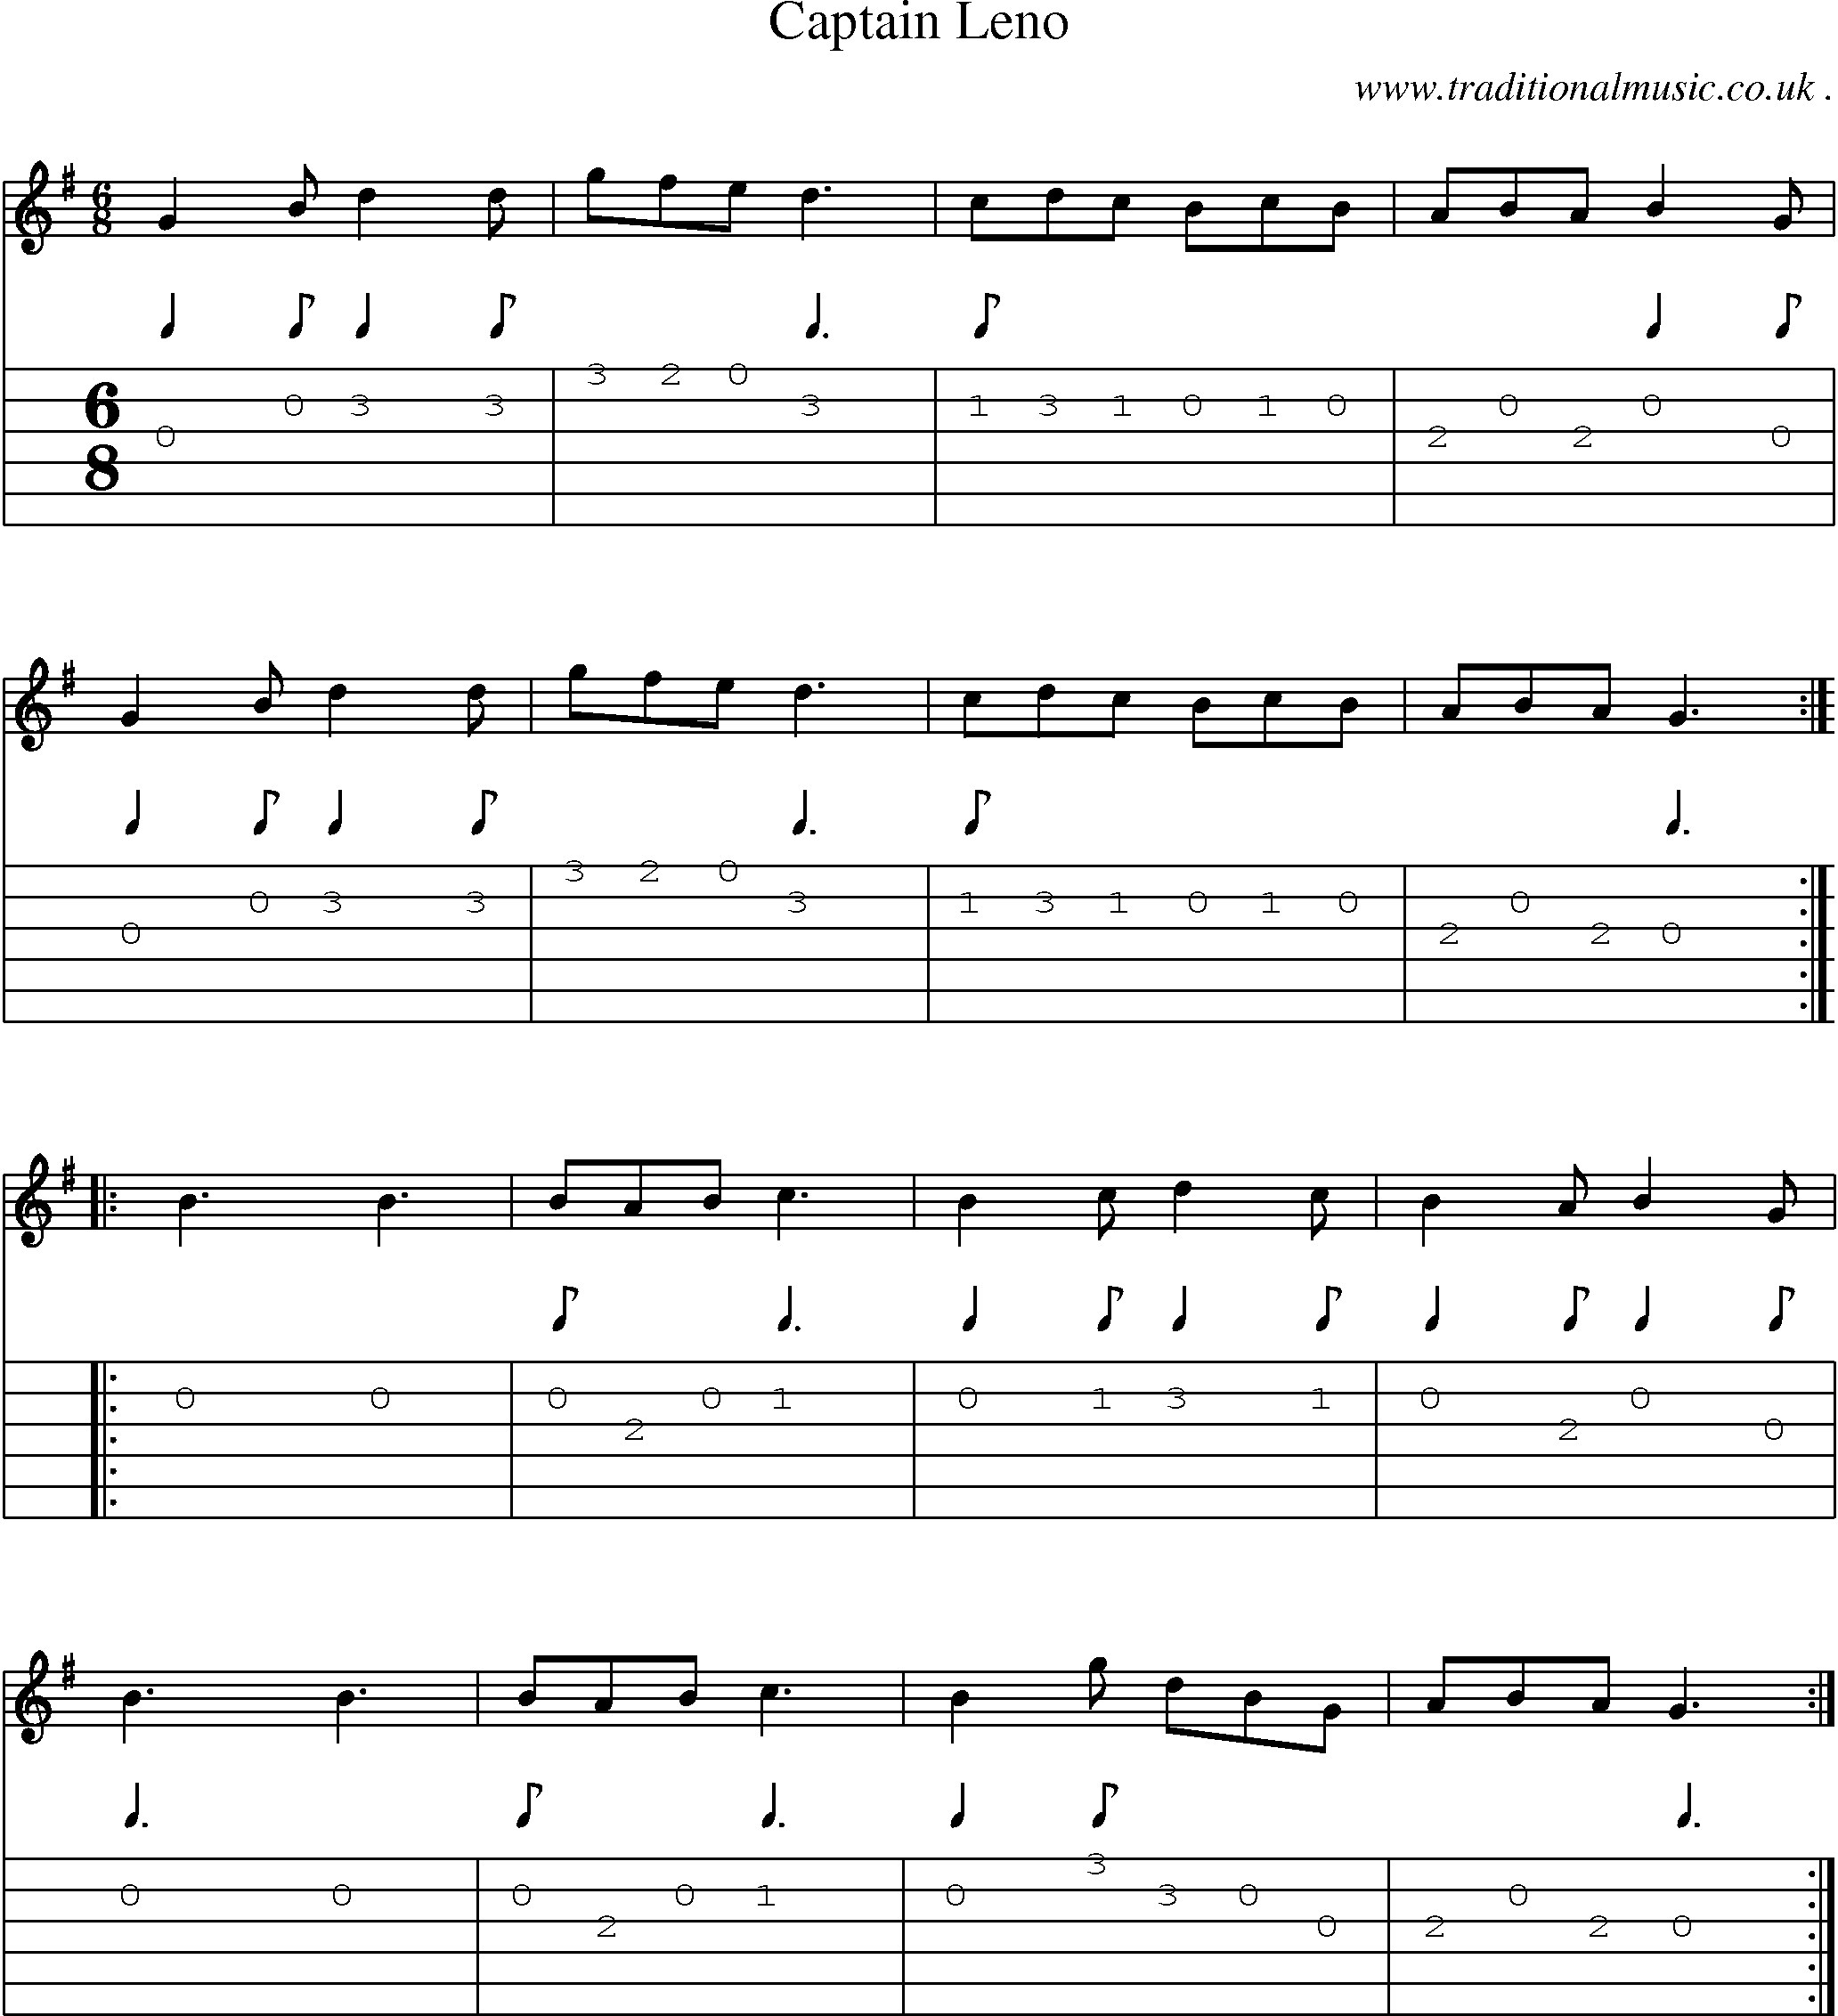 Sheet-Music and Guitar Tabs for Captain Leno